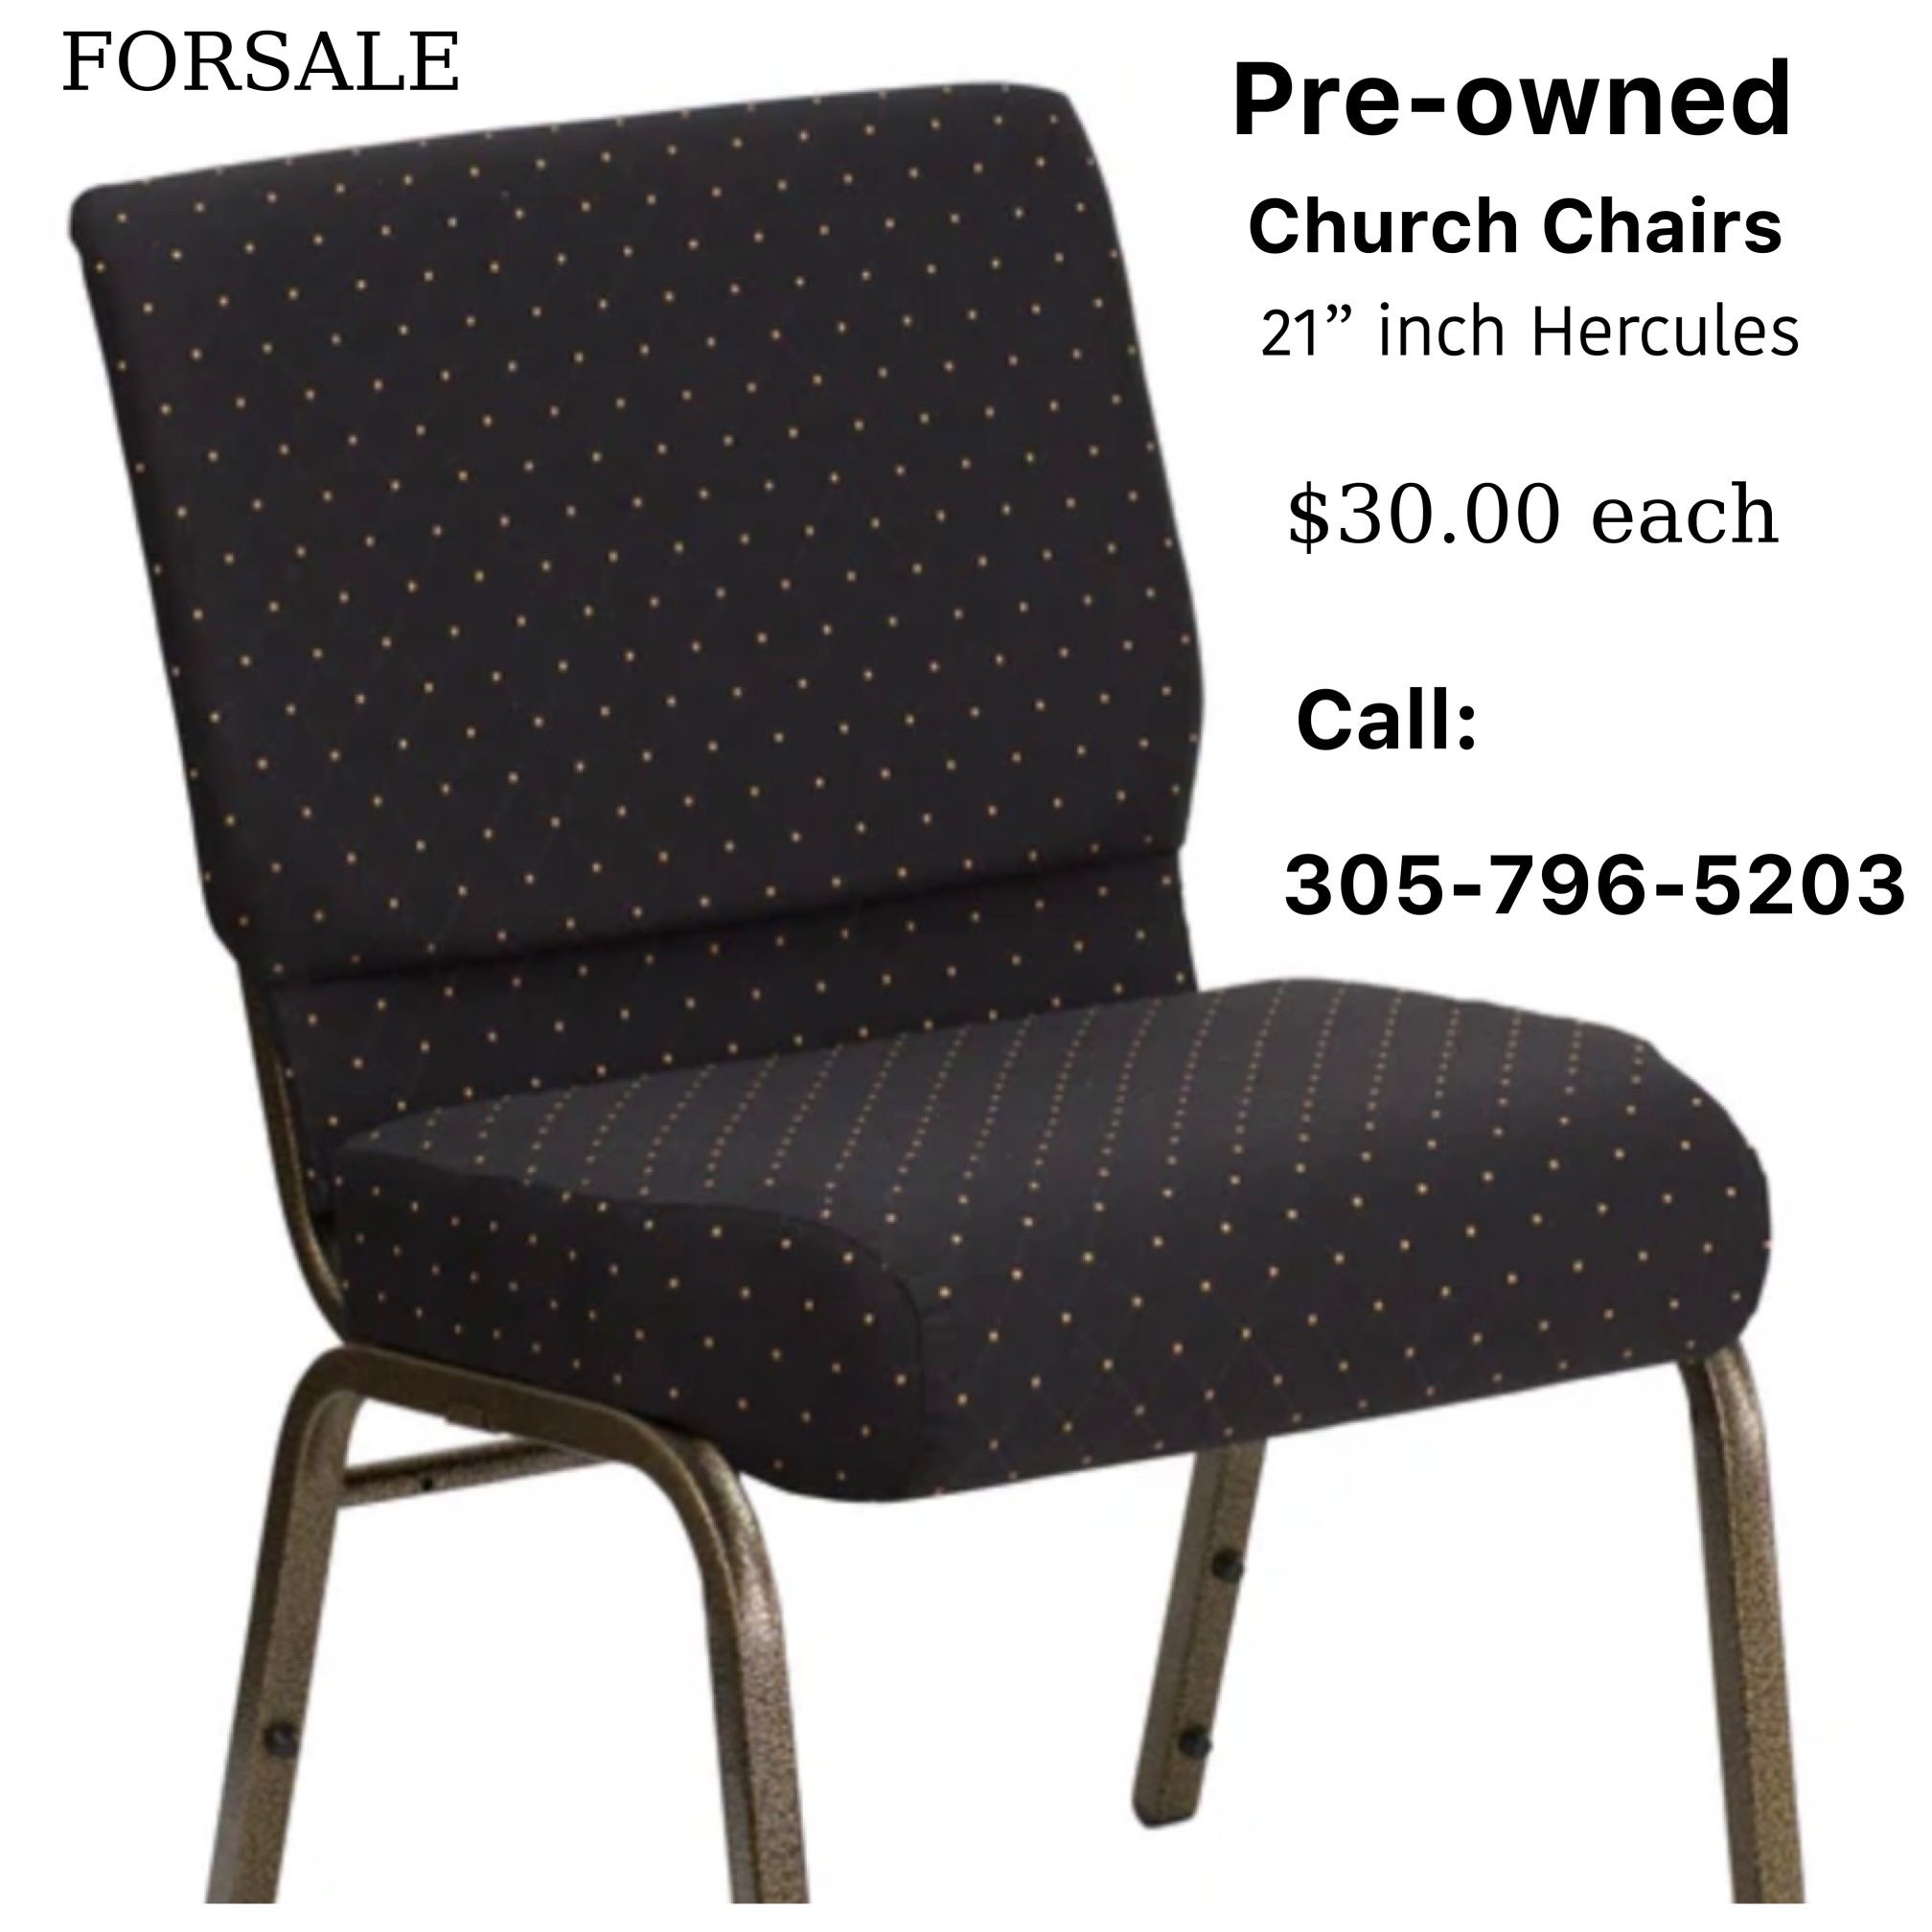 PRE-OWNED CHURCH CHAIRS (21” Inch Hércules)